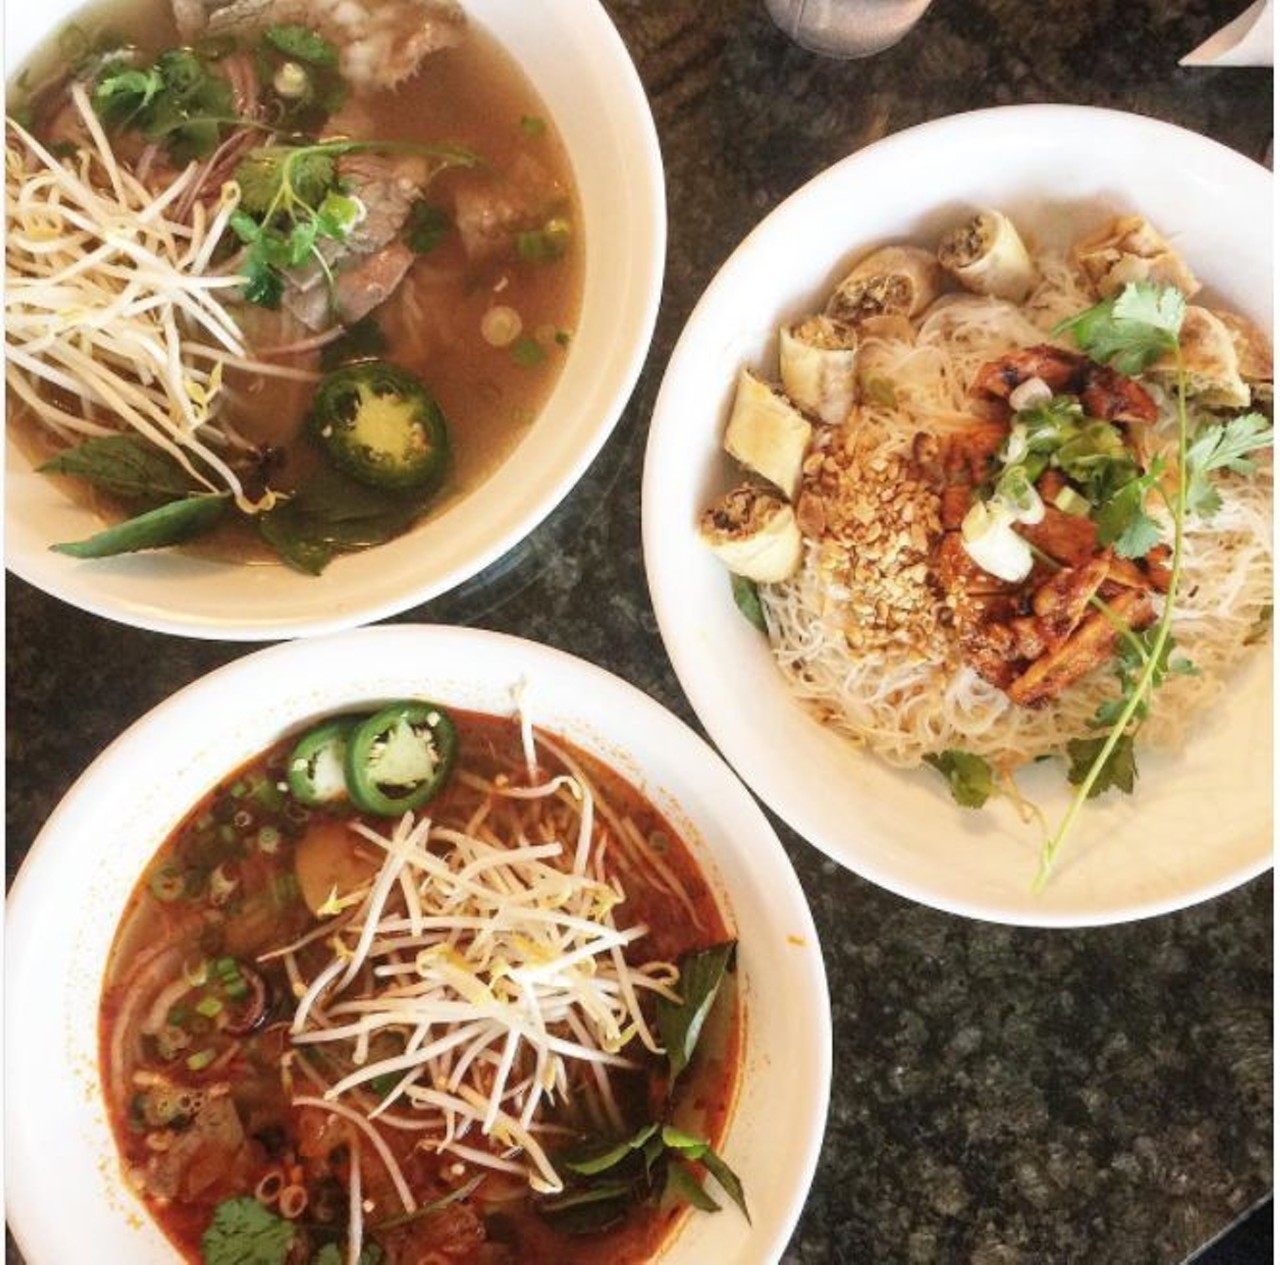 Pho VN Bistro
11503 NW Military Hwy., (210) 994-9638
The Castle Hills go-to is known for bright flavors and fresh ingredients. 
Photo via Instagram,  stine.eats